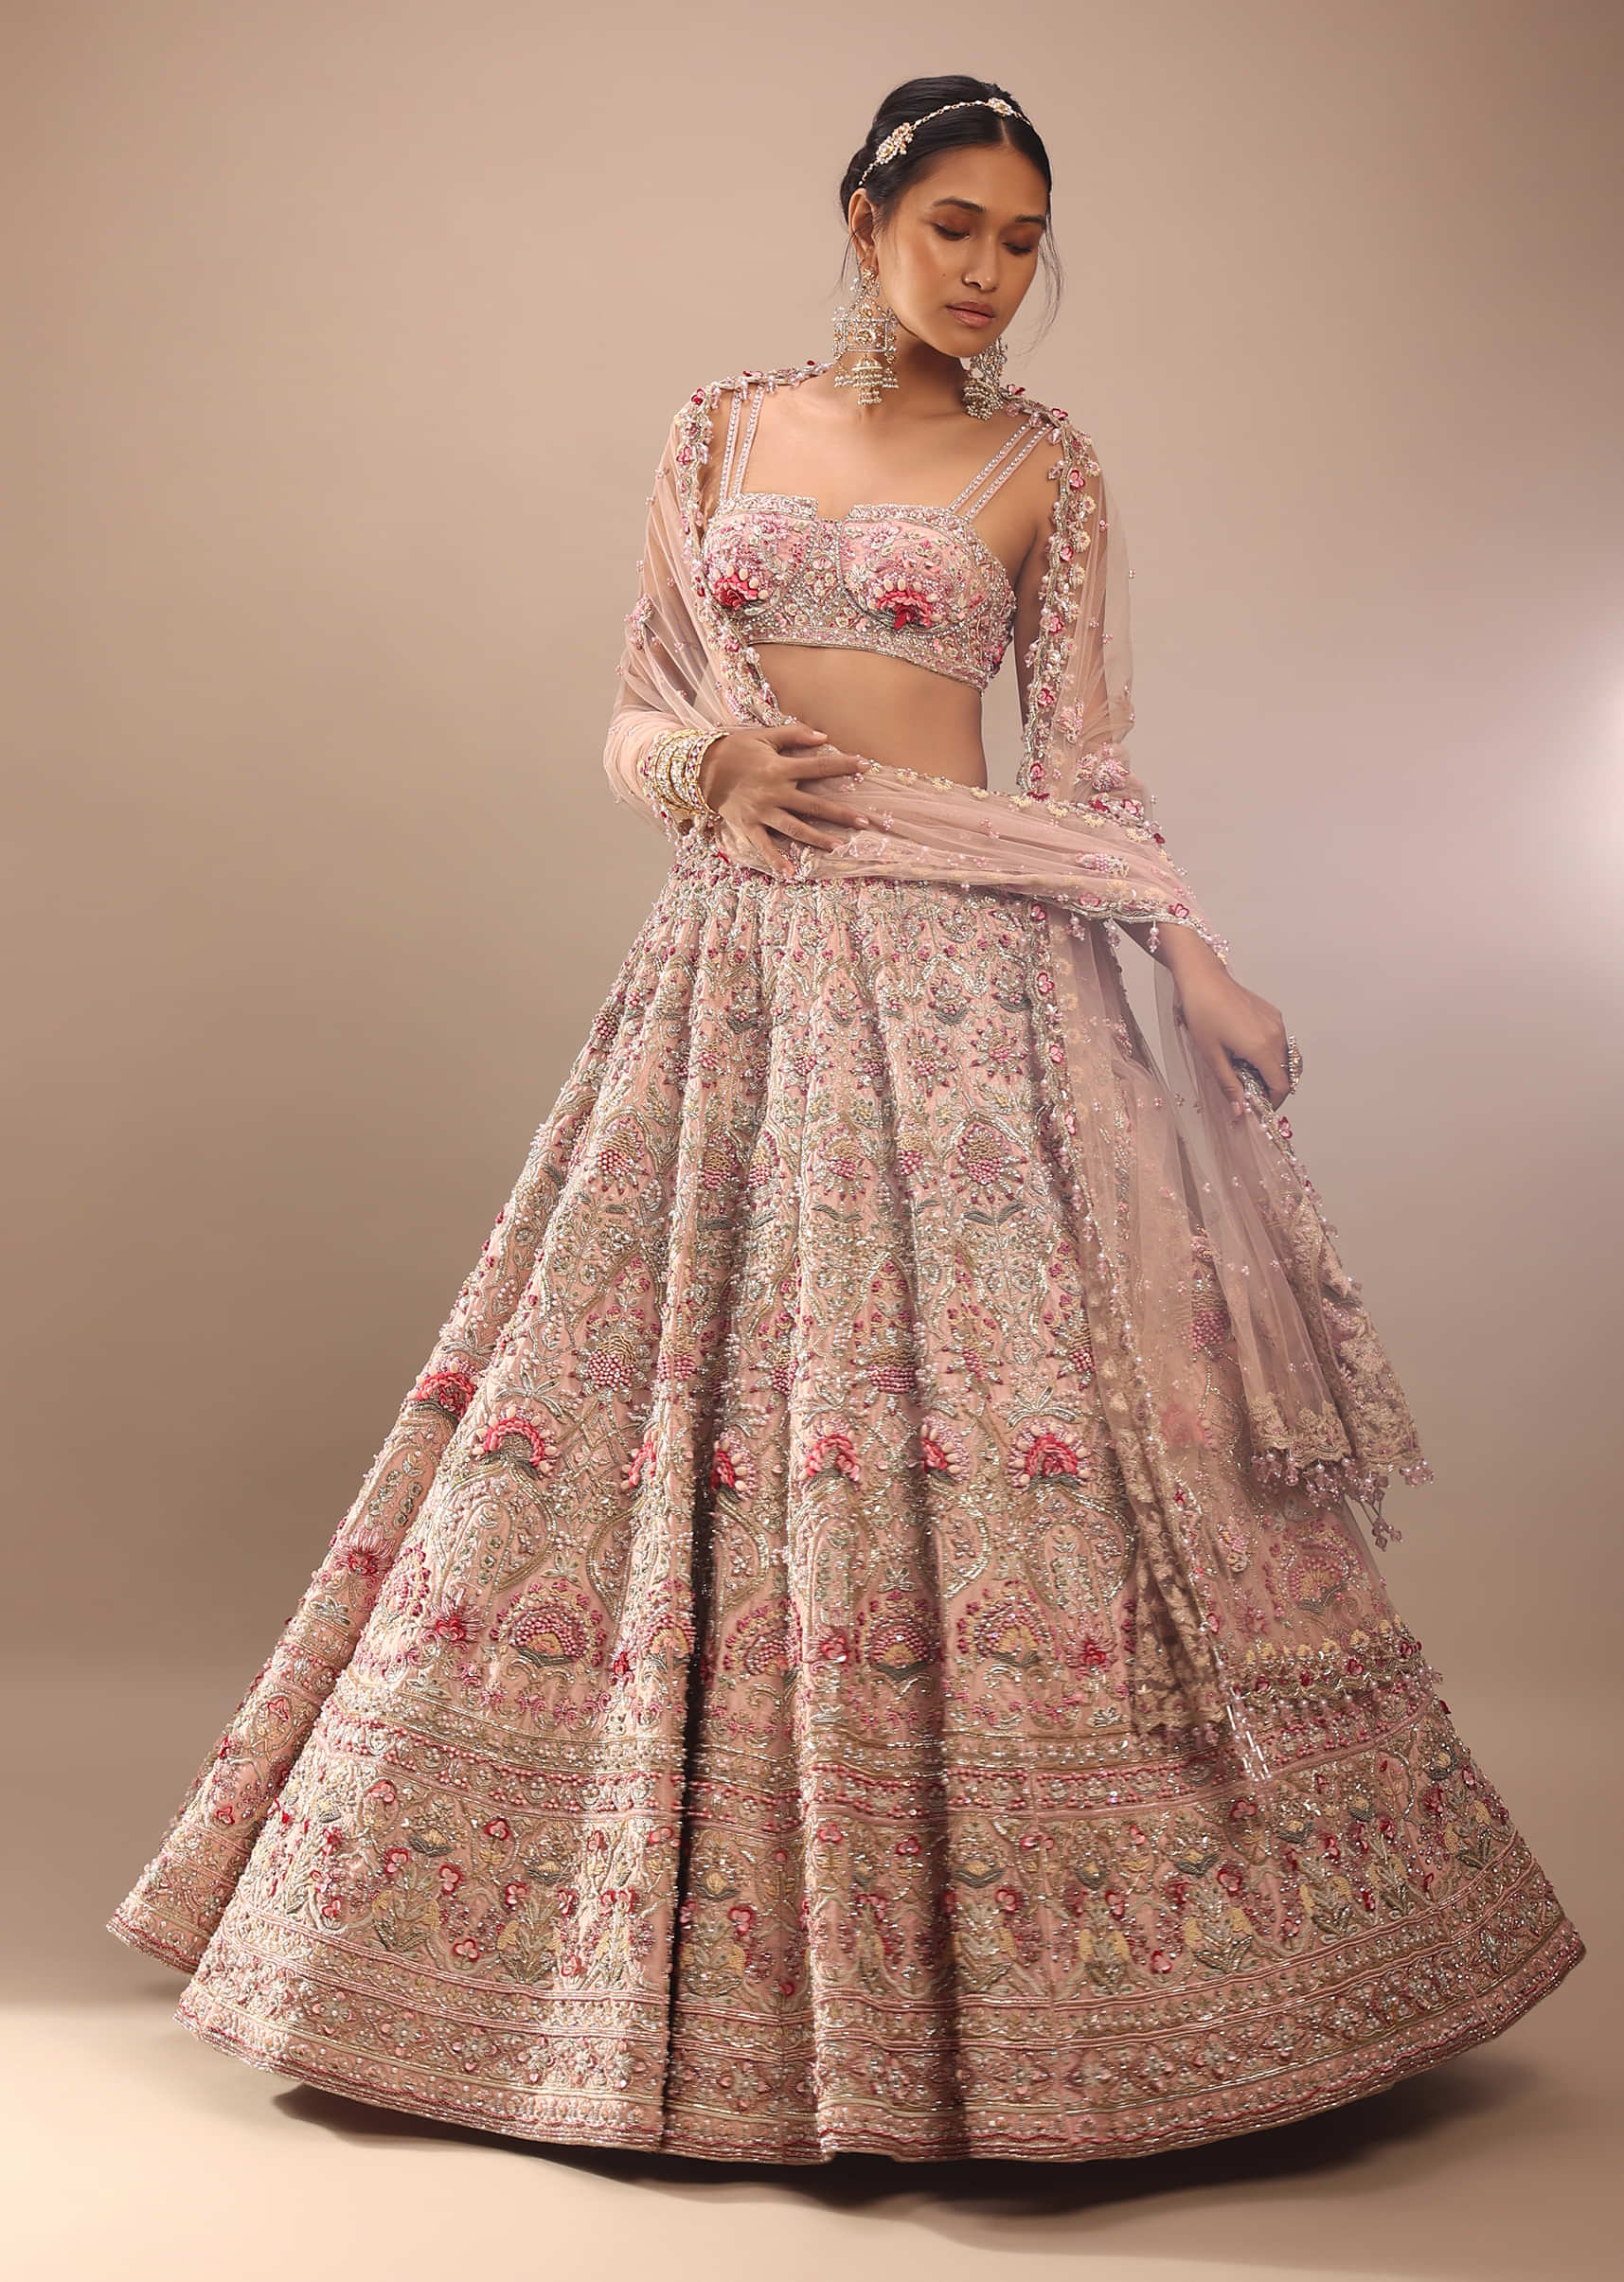 Charm Pink Rumi Lehenga Set In 3D Flower Motifs And Abla Embroidery, Crop Top Comes With The Similar Embroidery